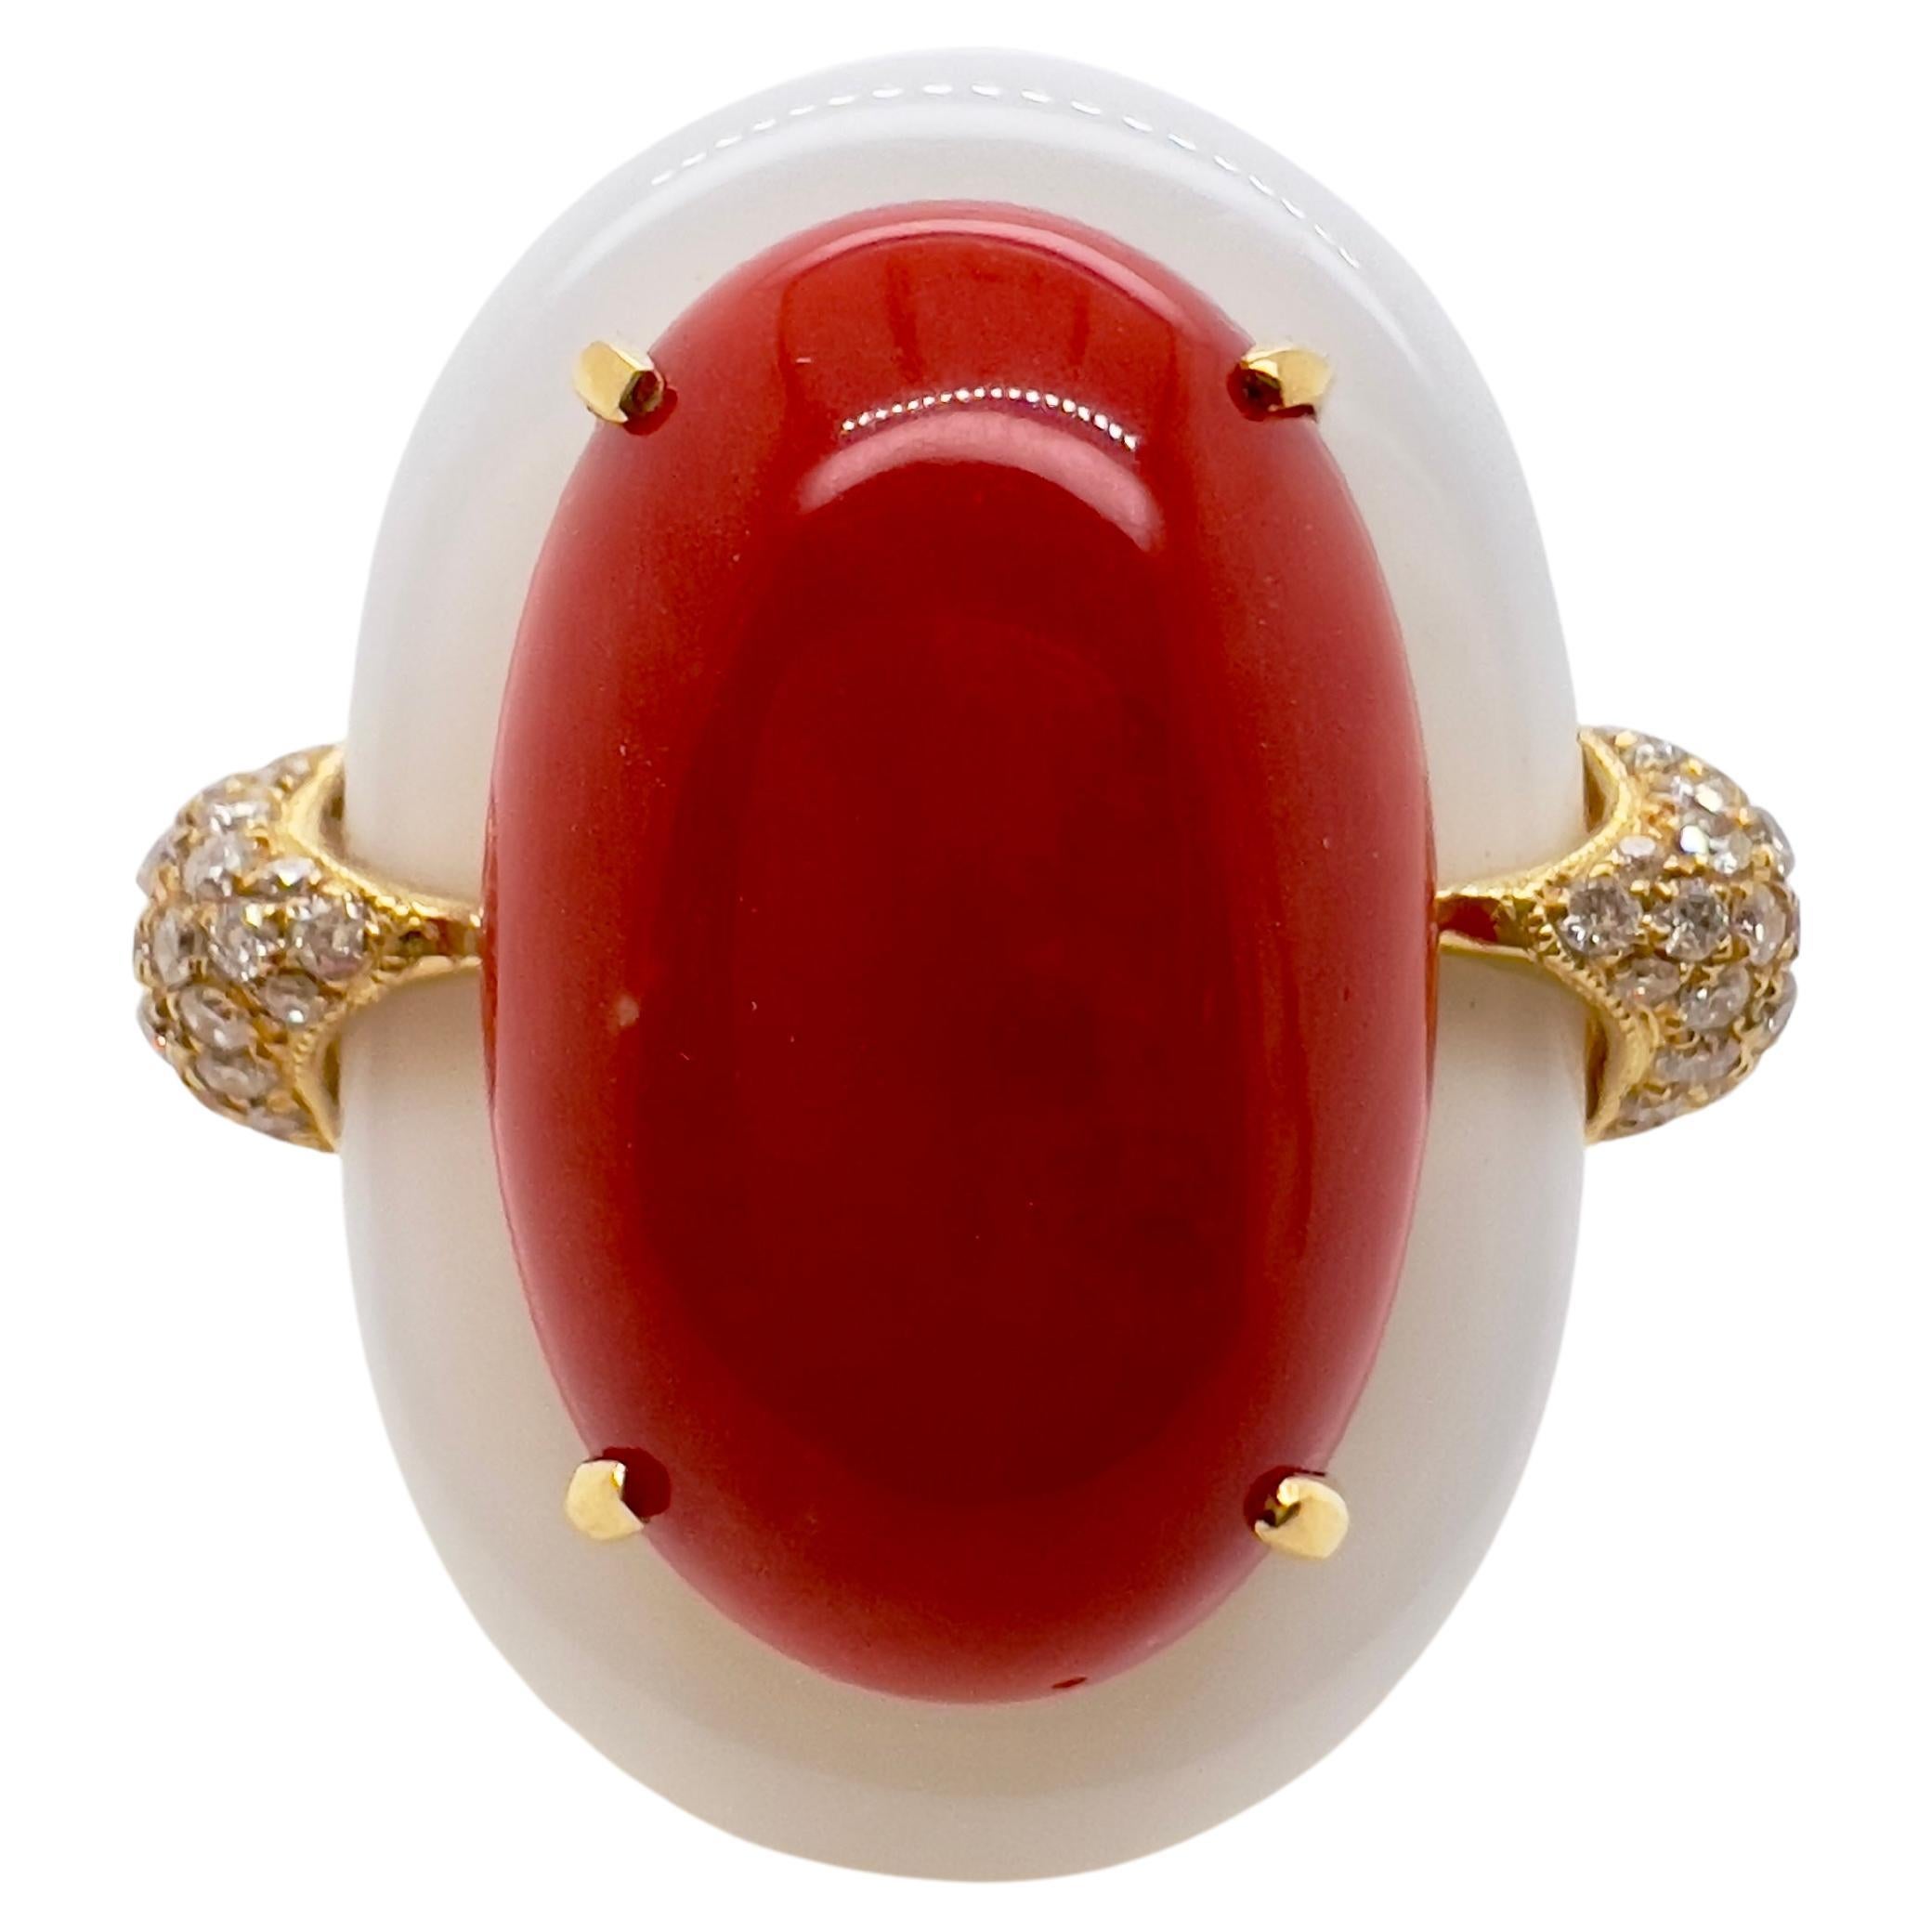 18k Gold Plated Oval Red Onyx Gemstone Ring For Women's Everyday Wear  Jewelry | eBay